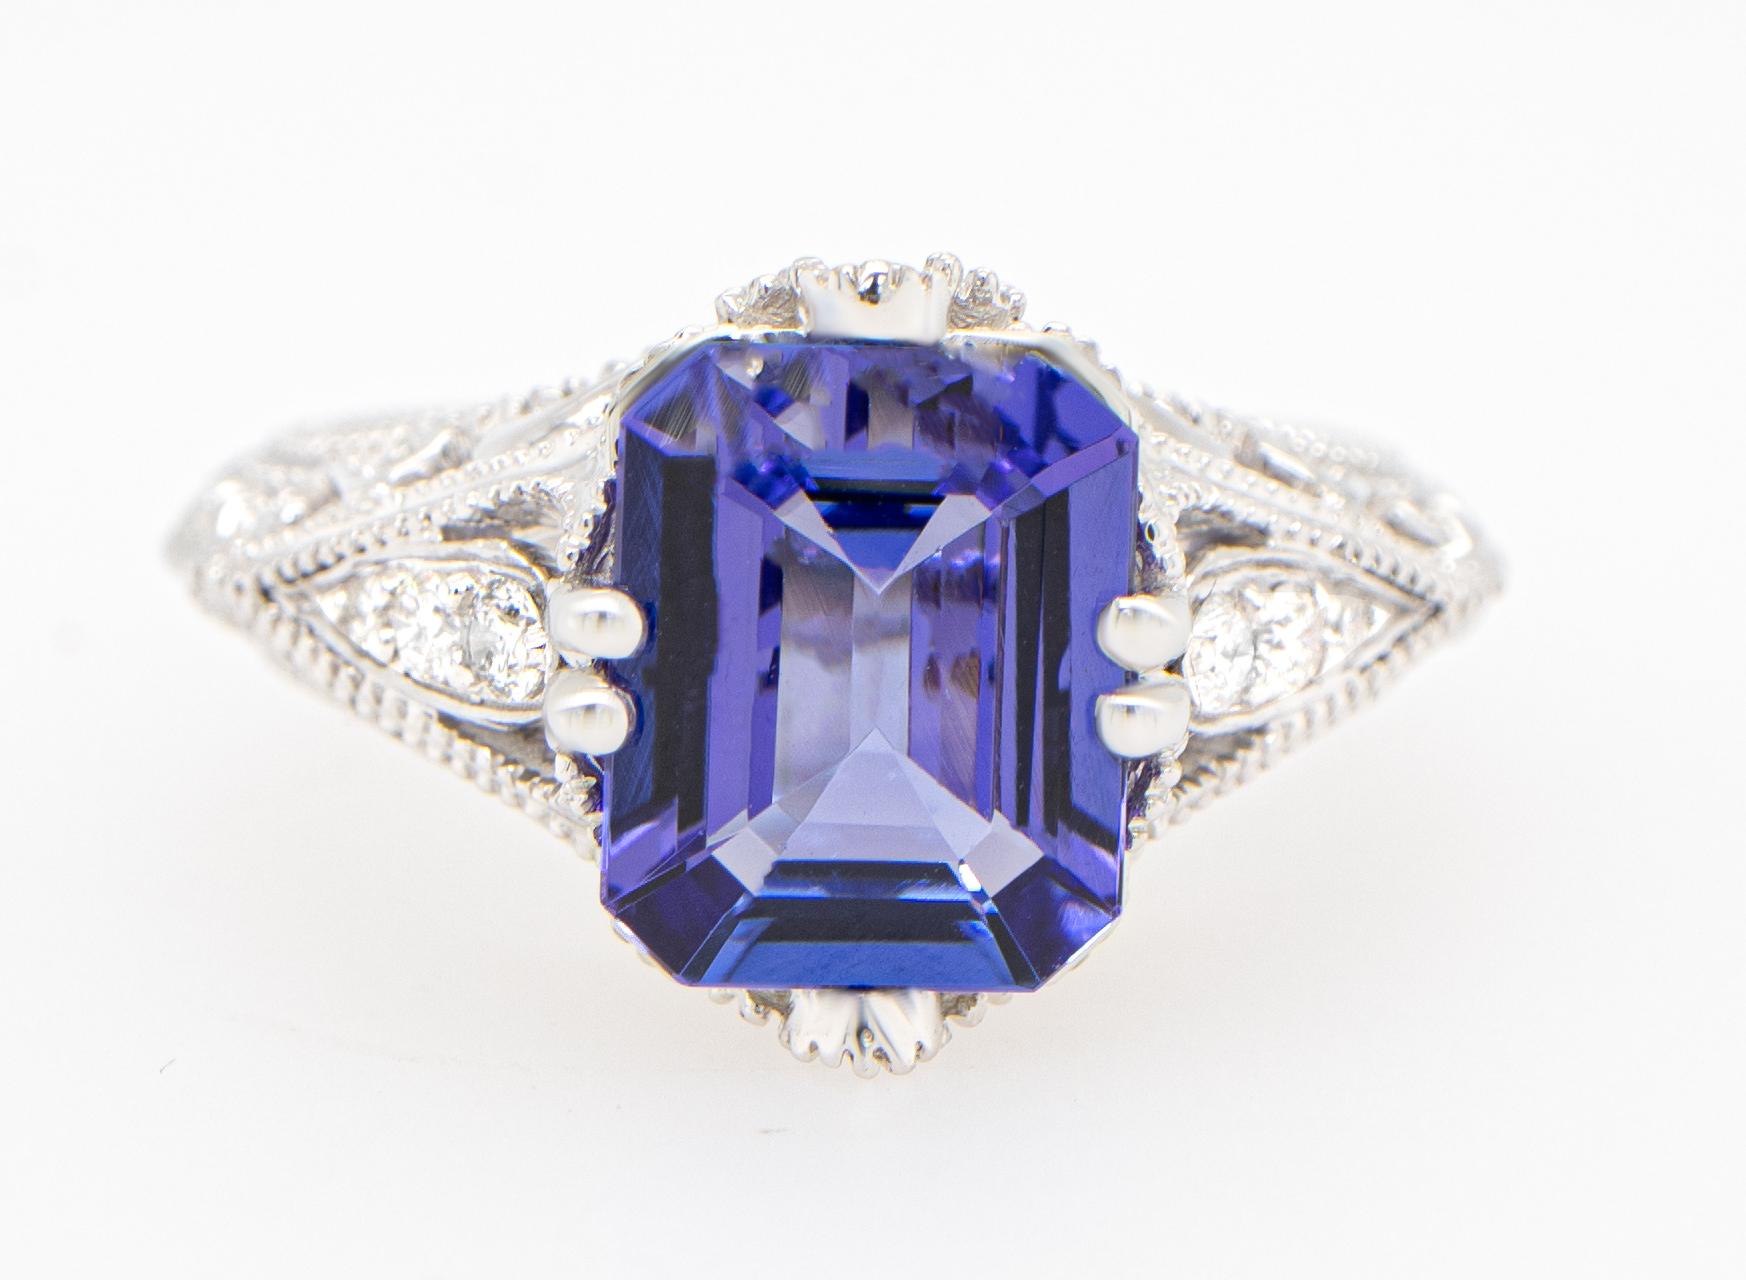 Tanzanite Ring With Diamond Setting 3.24 Carats 18K Gold In Excellent Condition For Sale In Laguna Niguel, CA